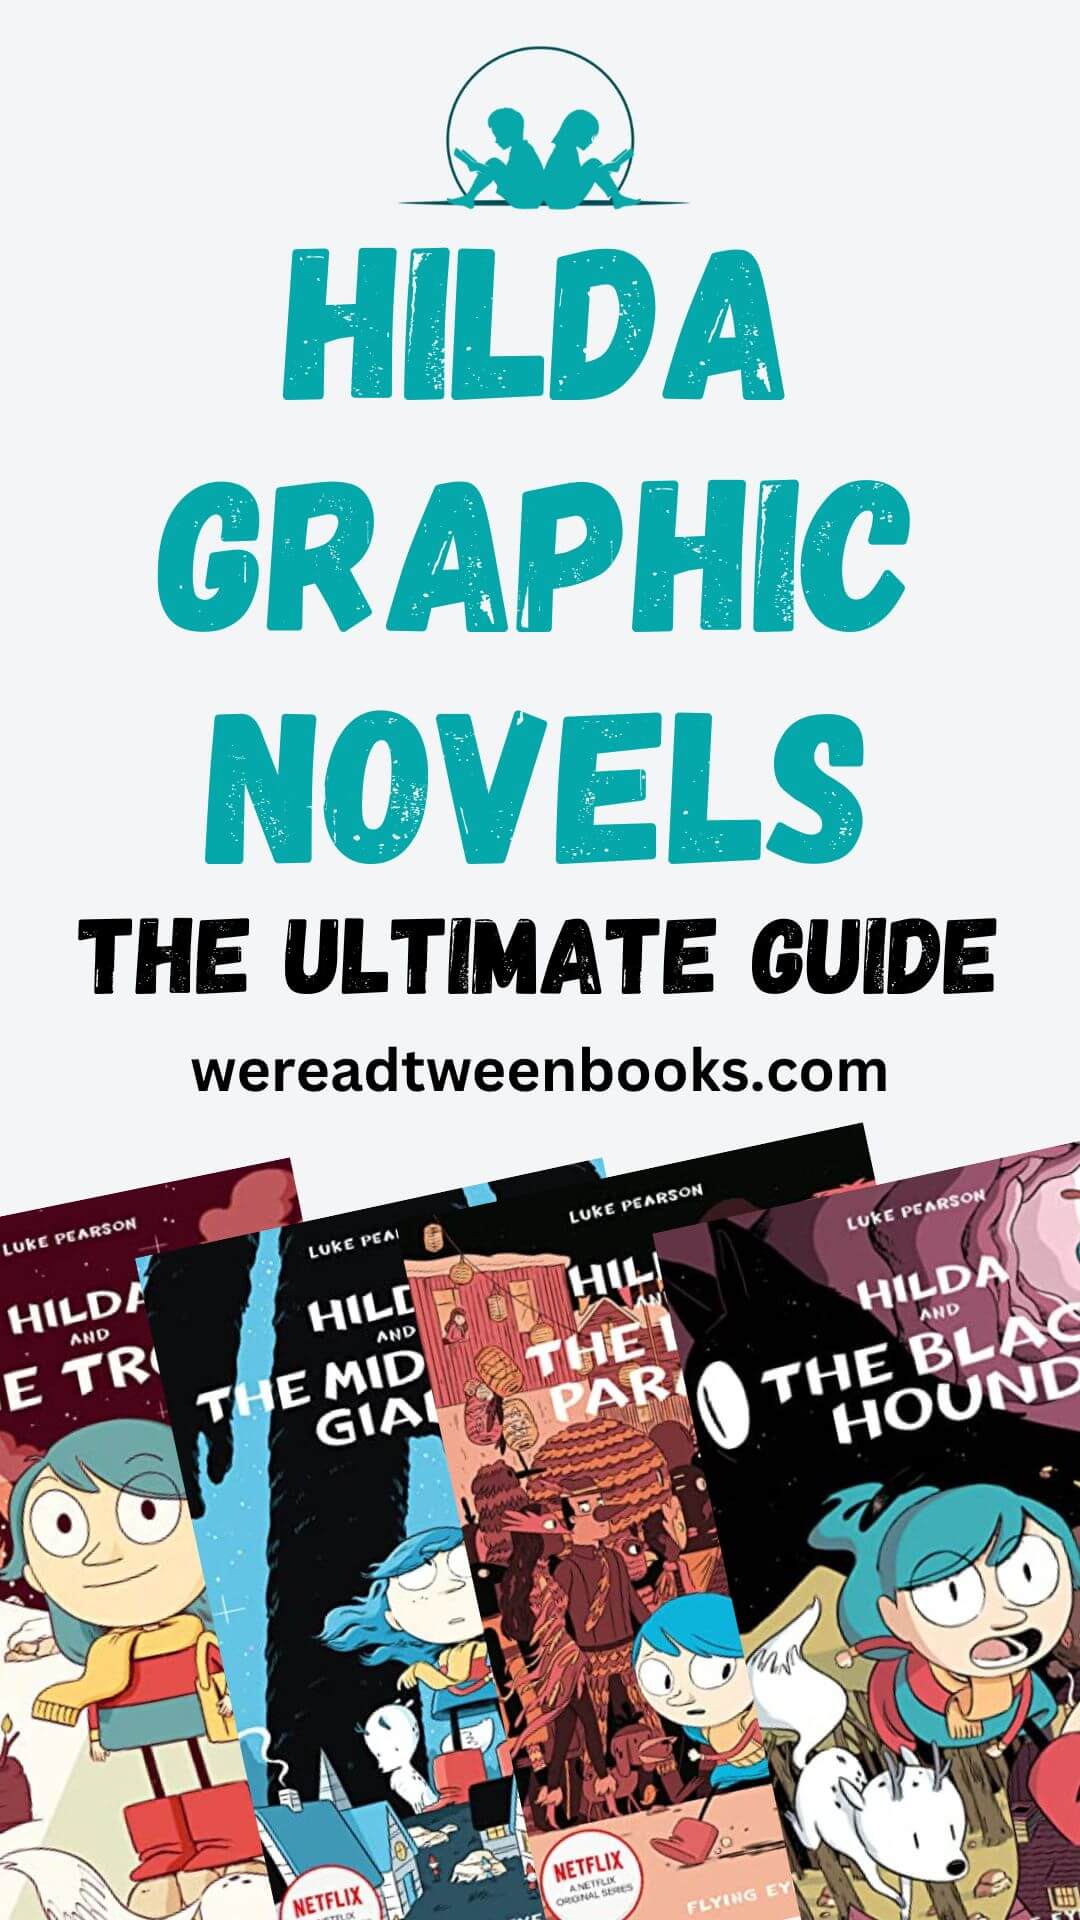 Check out the ultimate guide to the Hilda graphic novels on We Read Tween Books to discover all the Hilda comics.